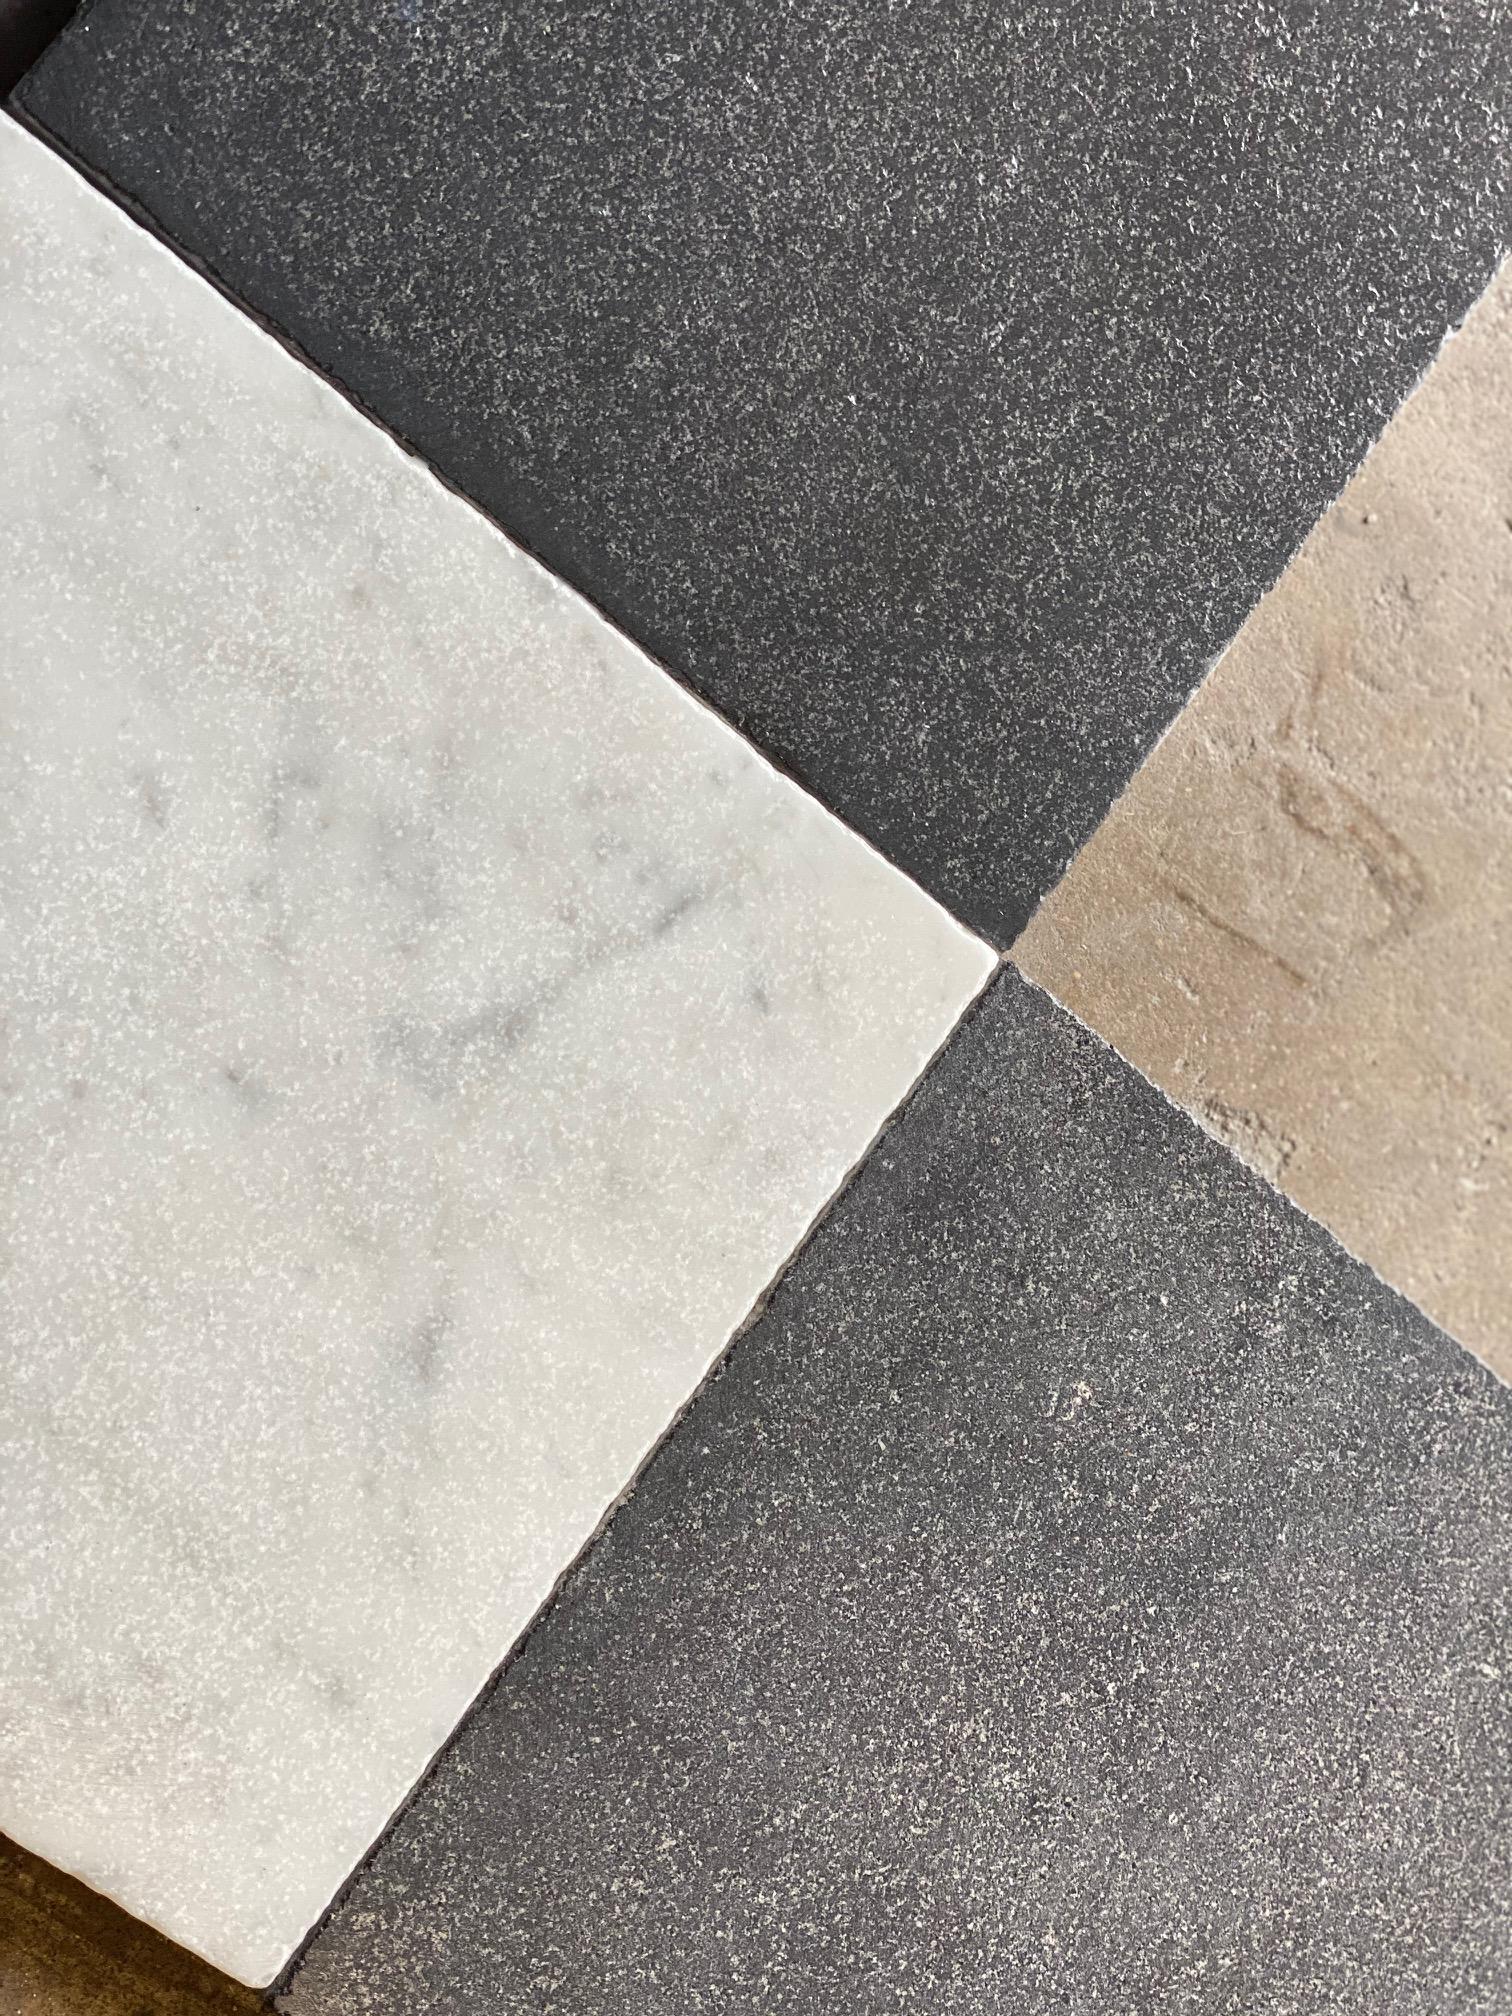 marble and limestone checkerboard floor